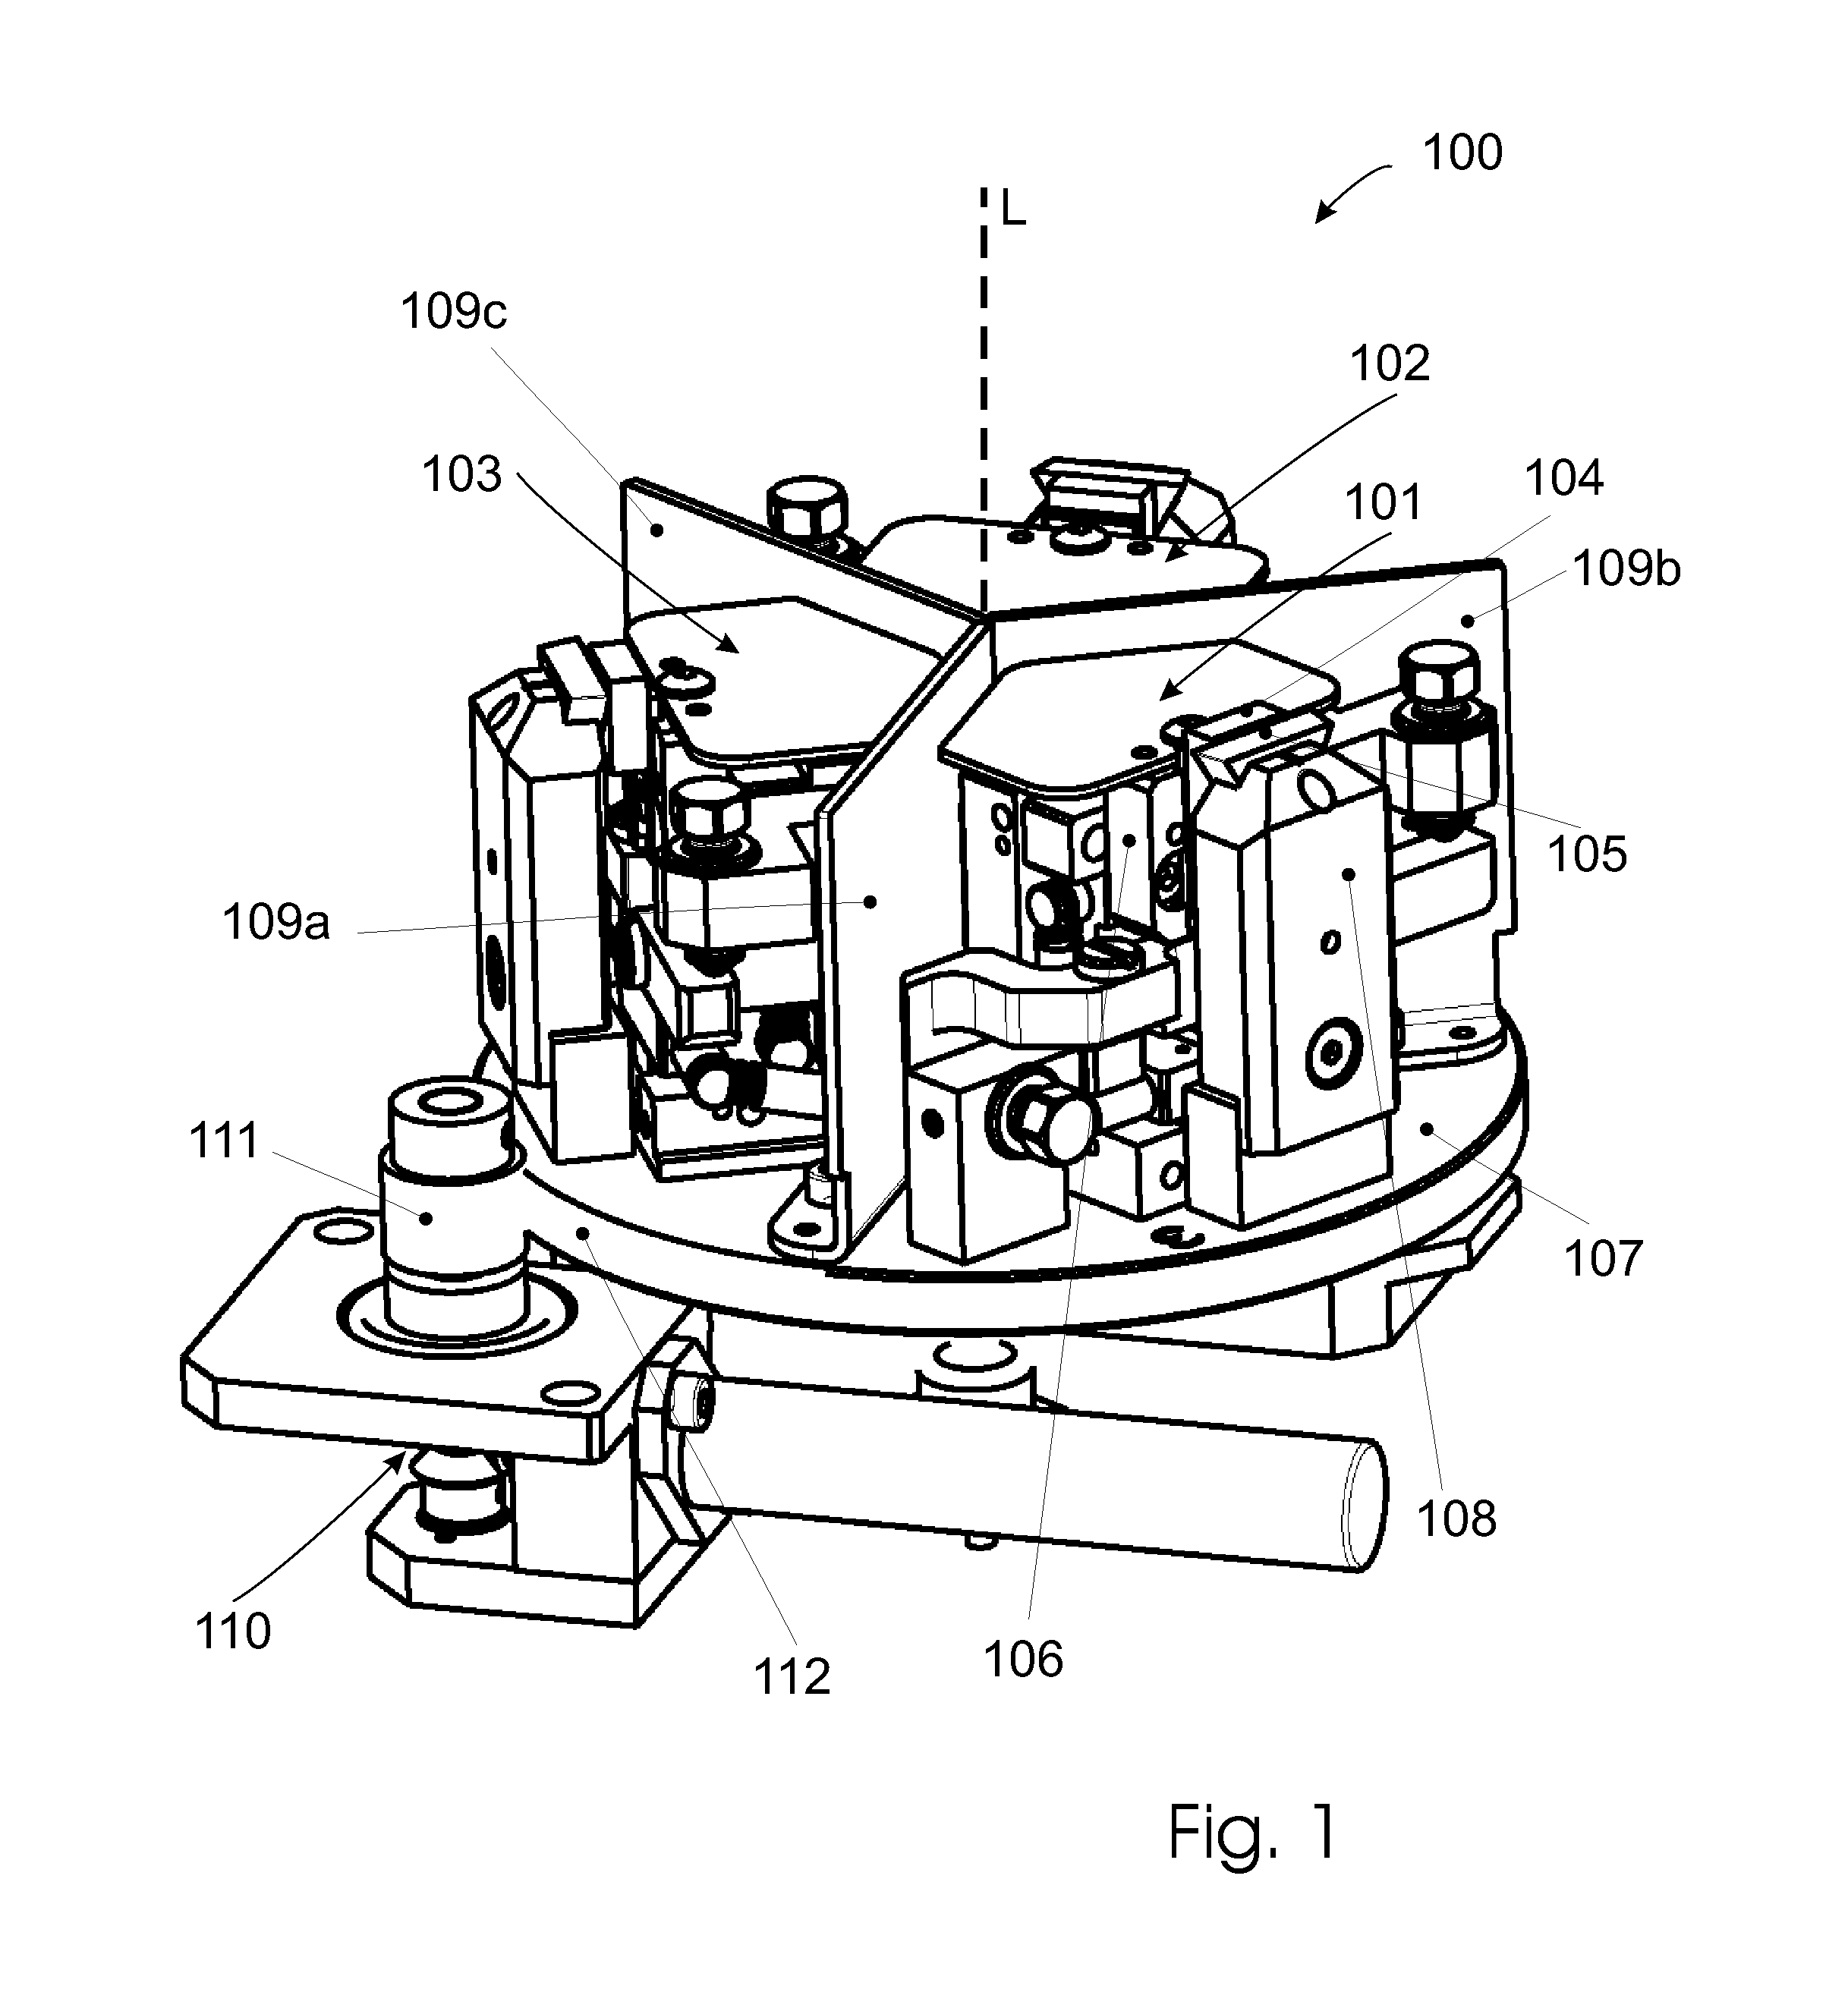 Apparatus and method for sample preparation